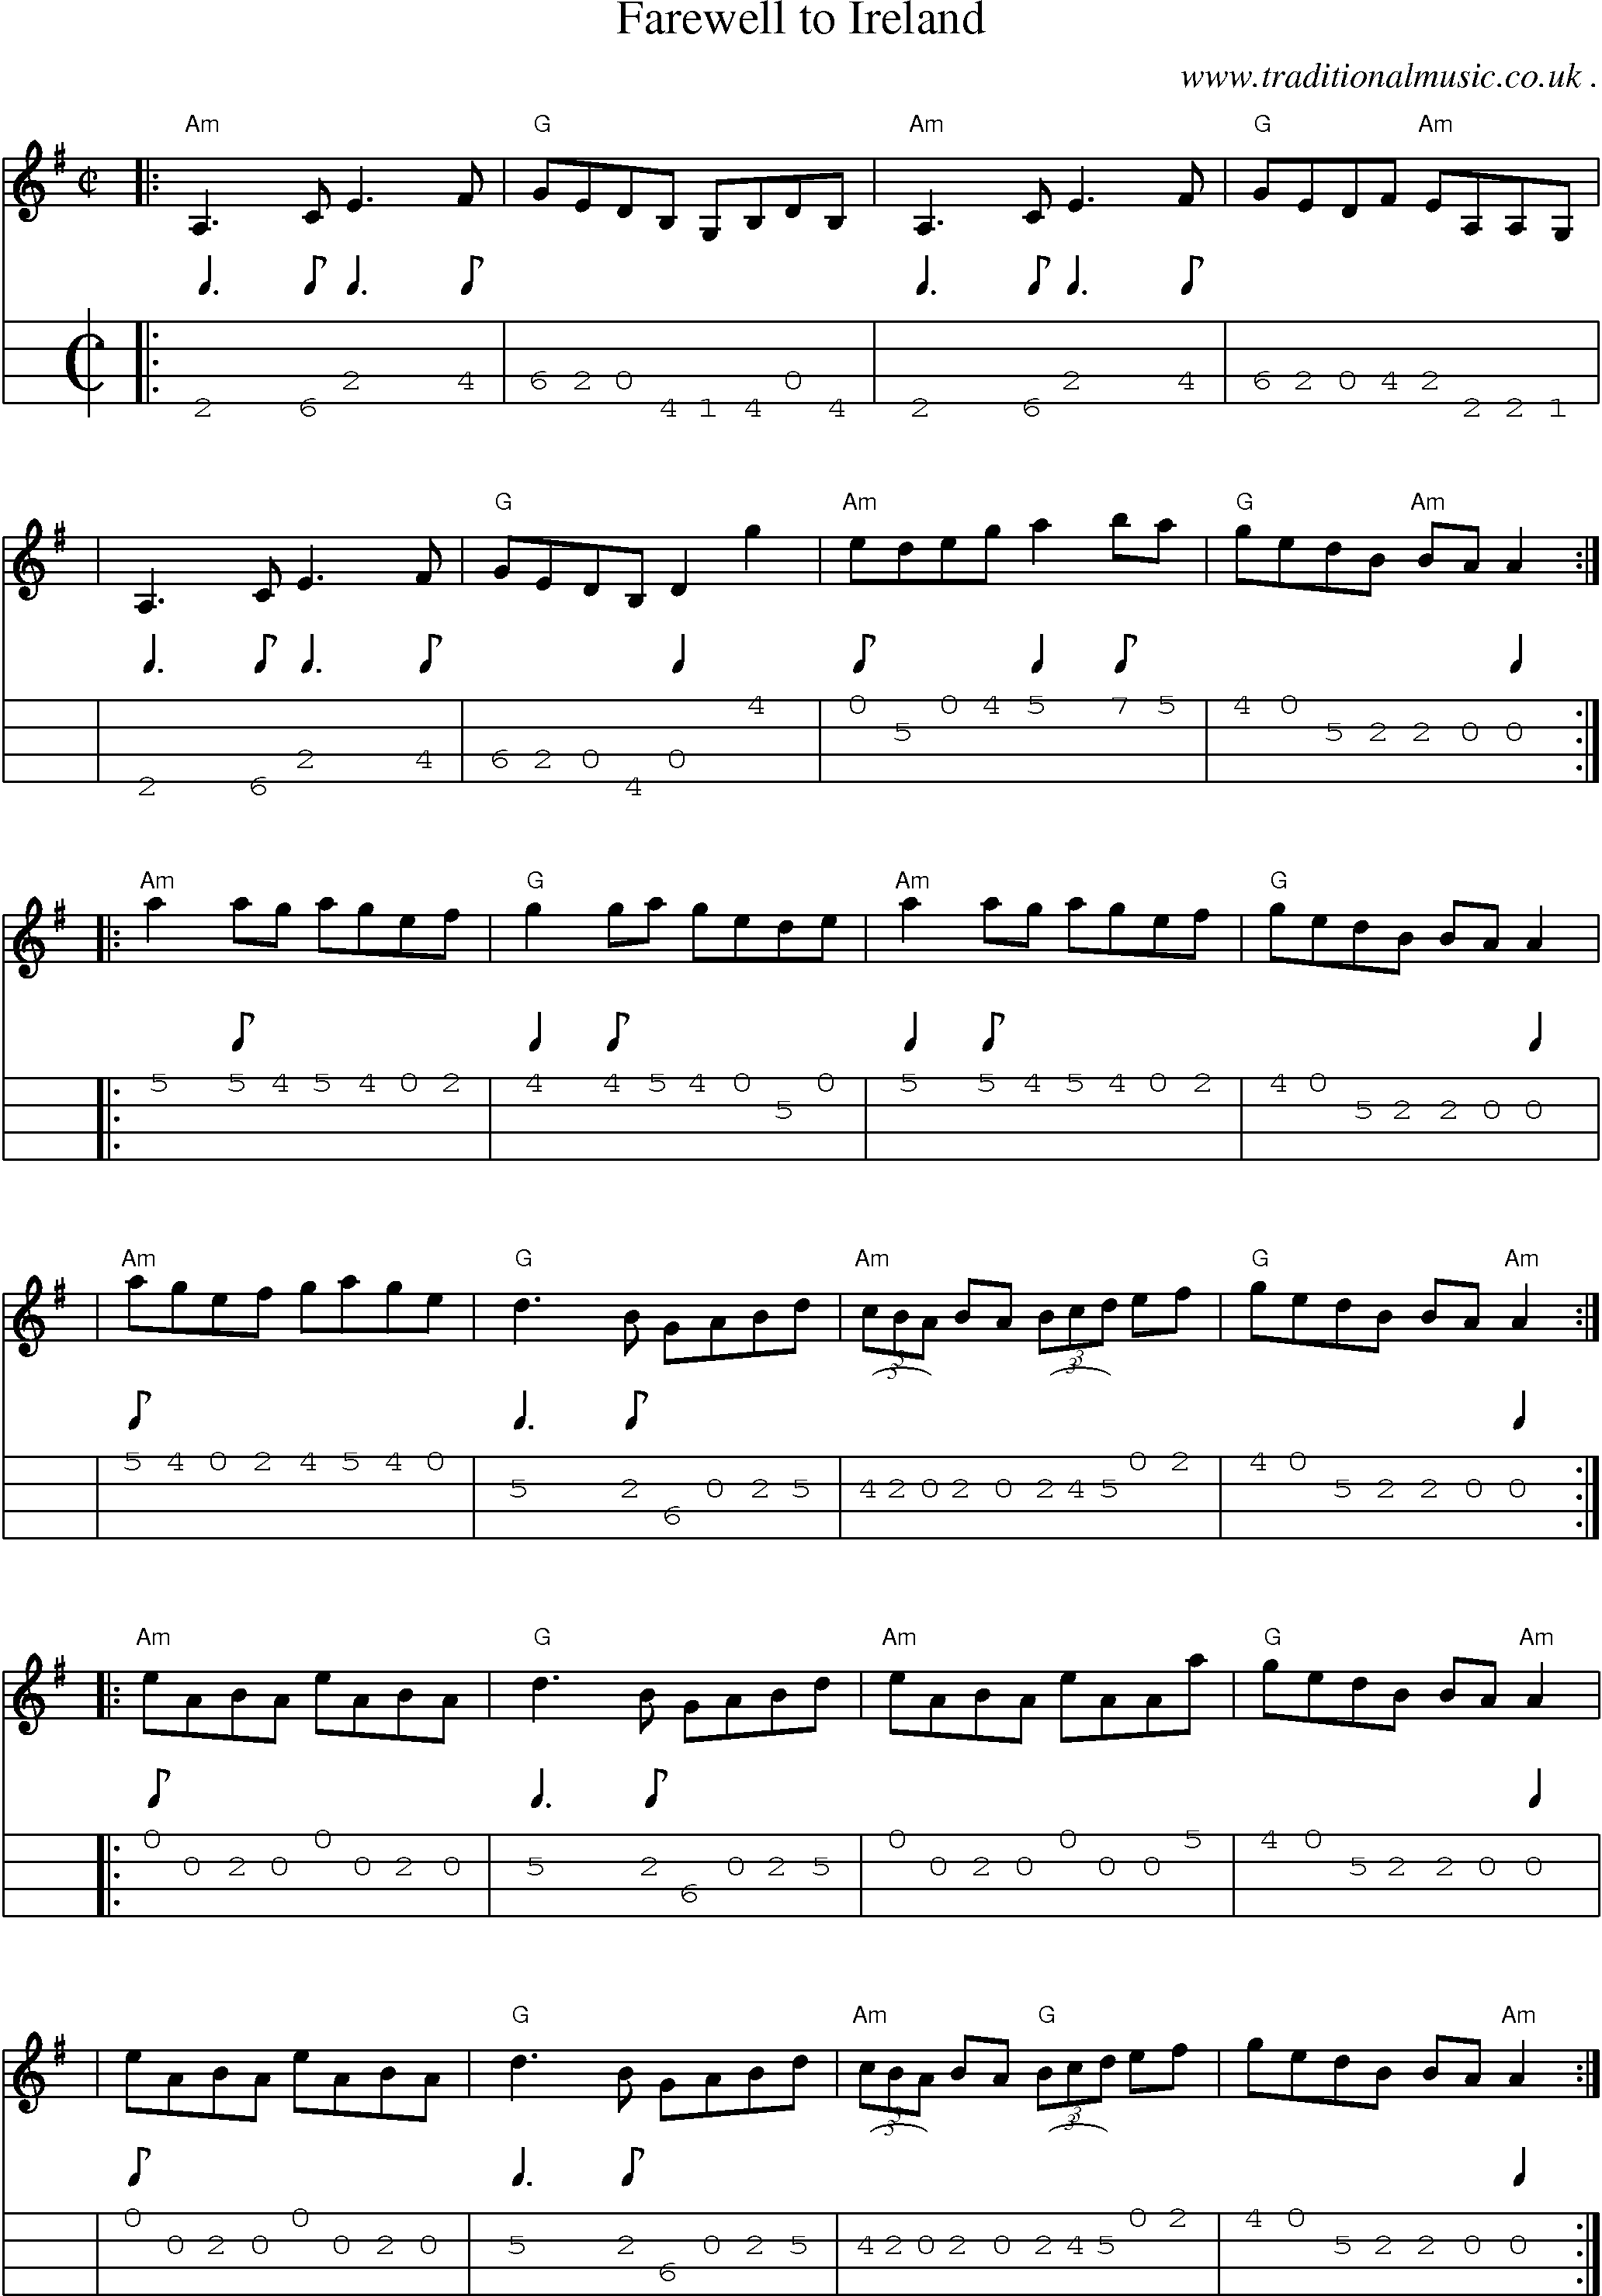 Sheet-music  score, Chords and Mandolin Tabs for Farewell To Ireland